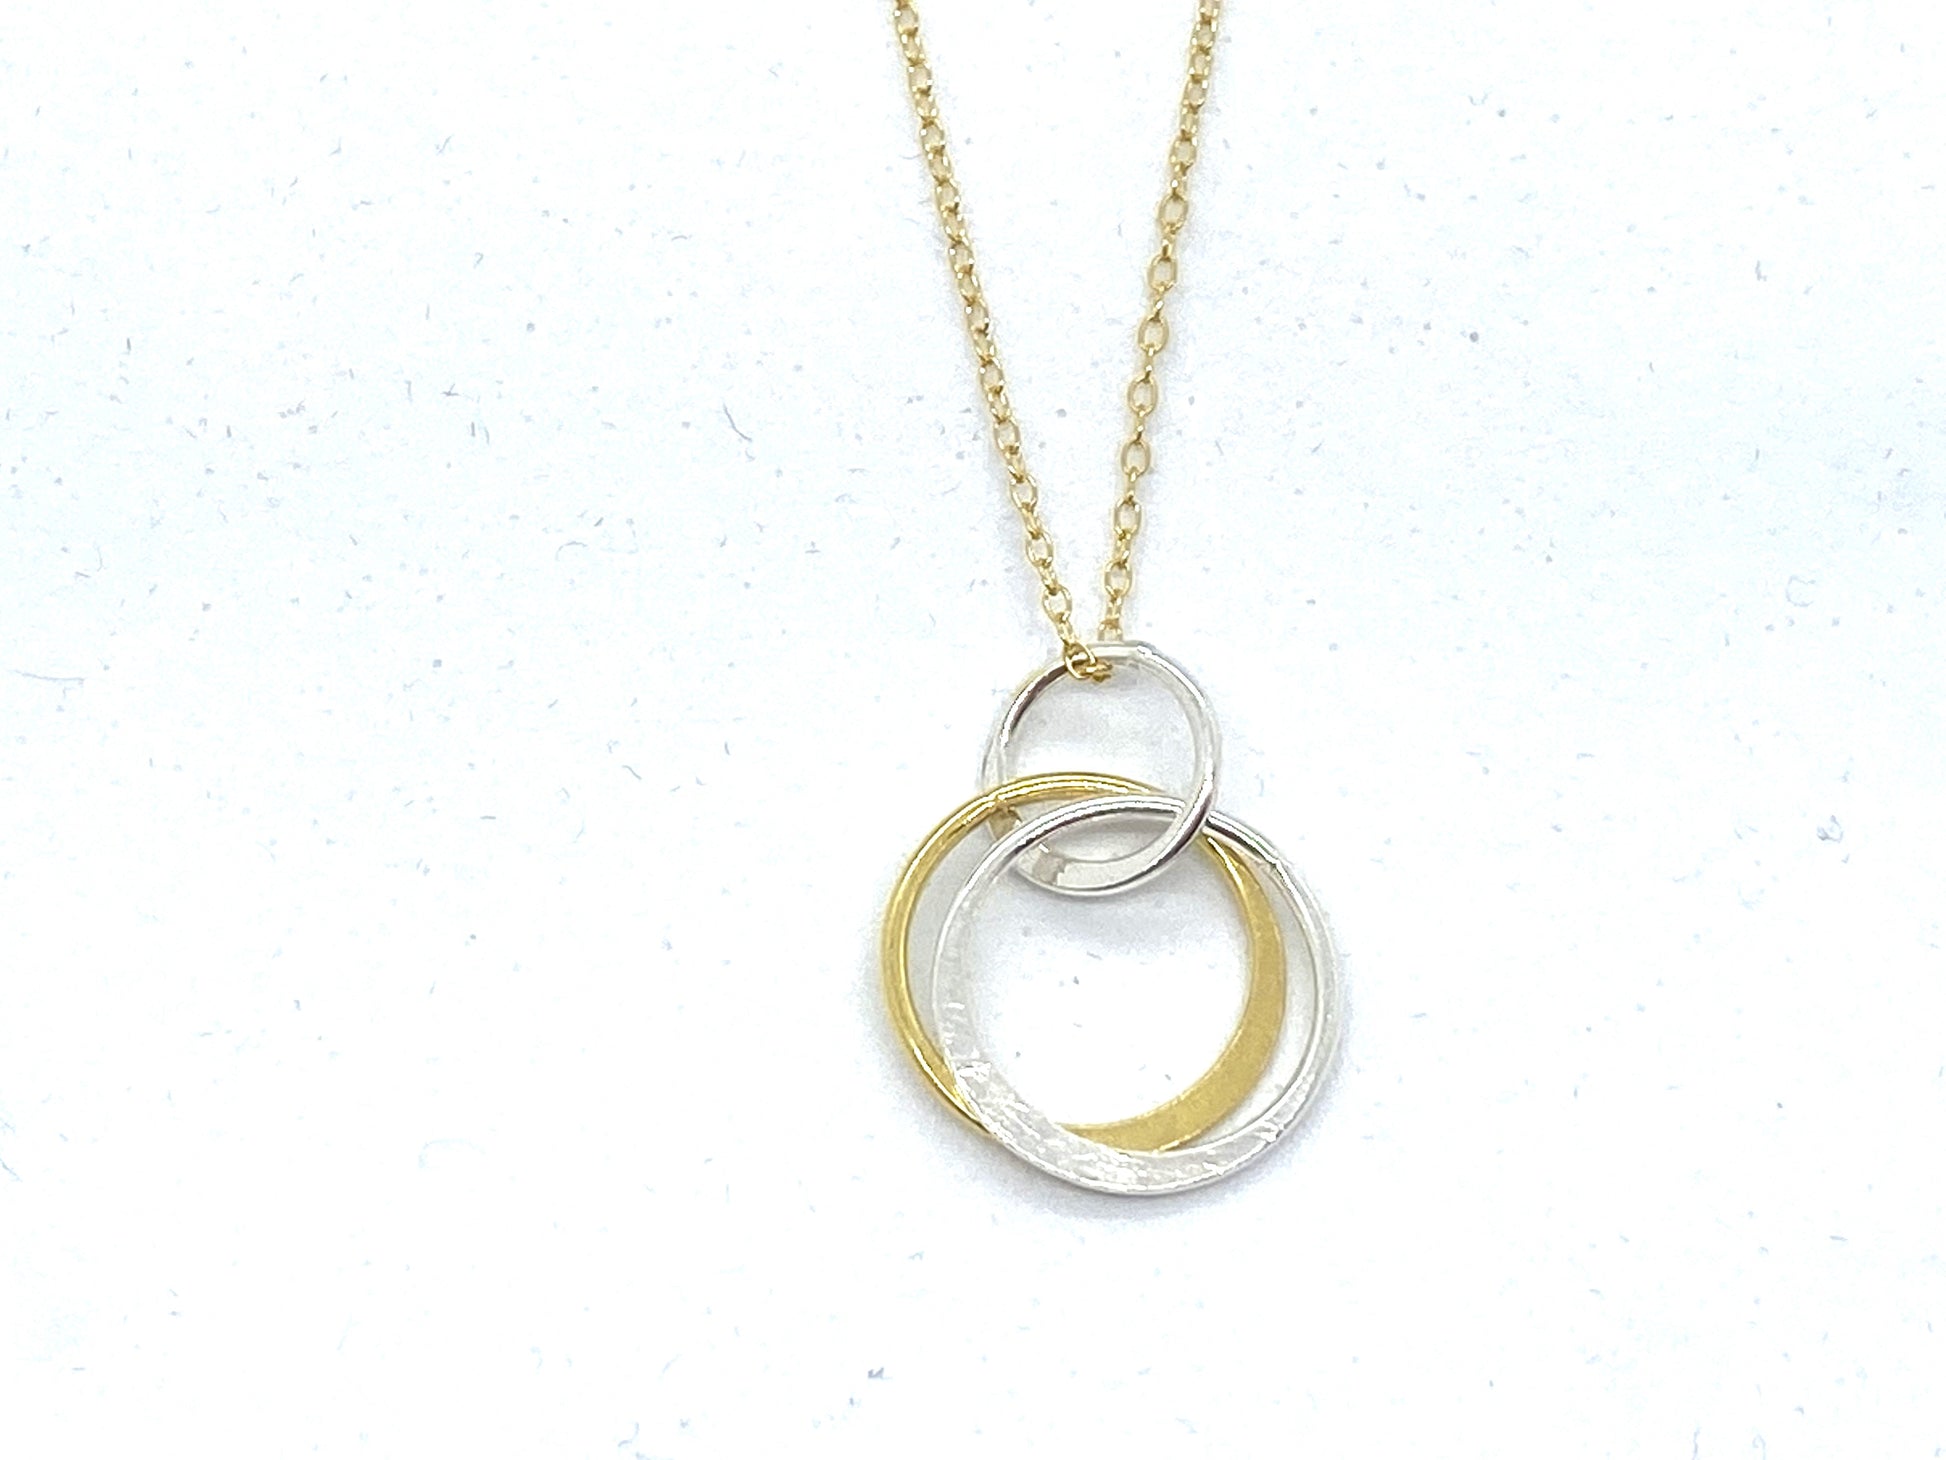 Forever linked necklace - Emmis Jewelry, Necklace, [product_color]